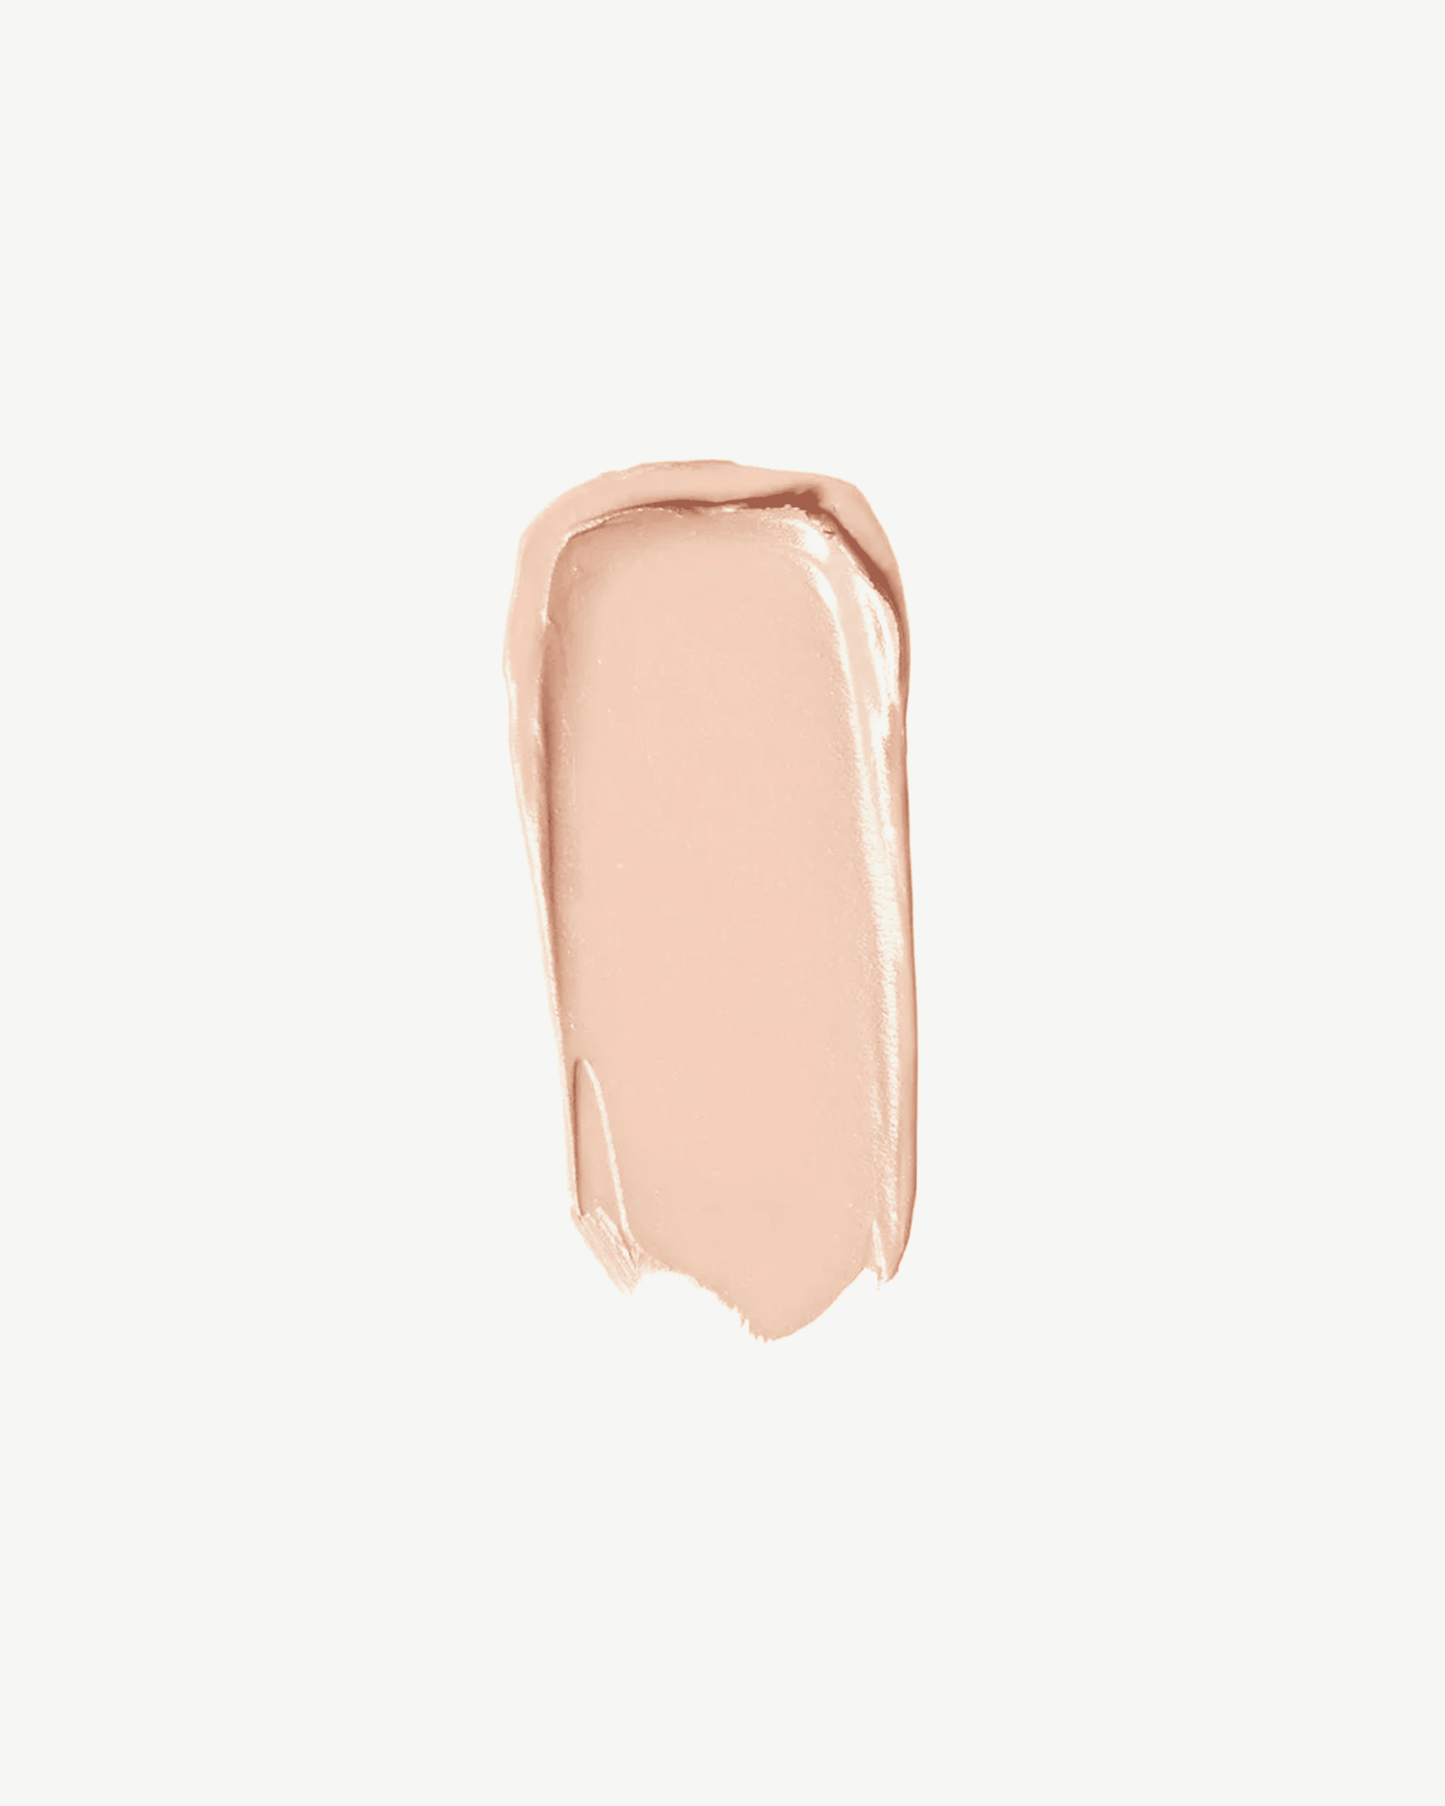 Pink 30 (light with cool pink undertones)